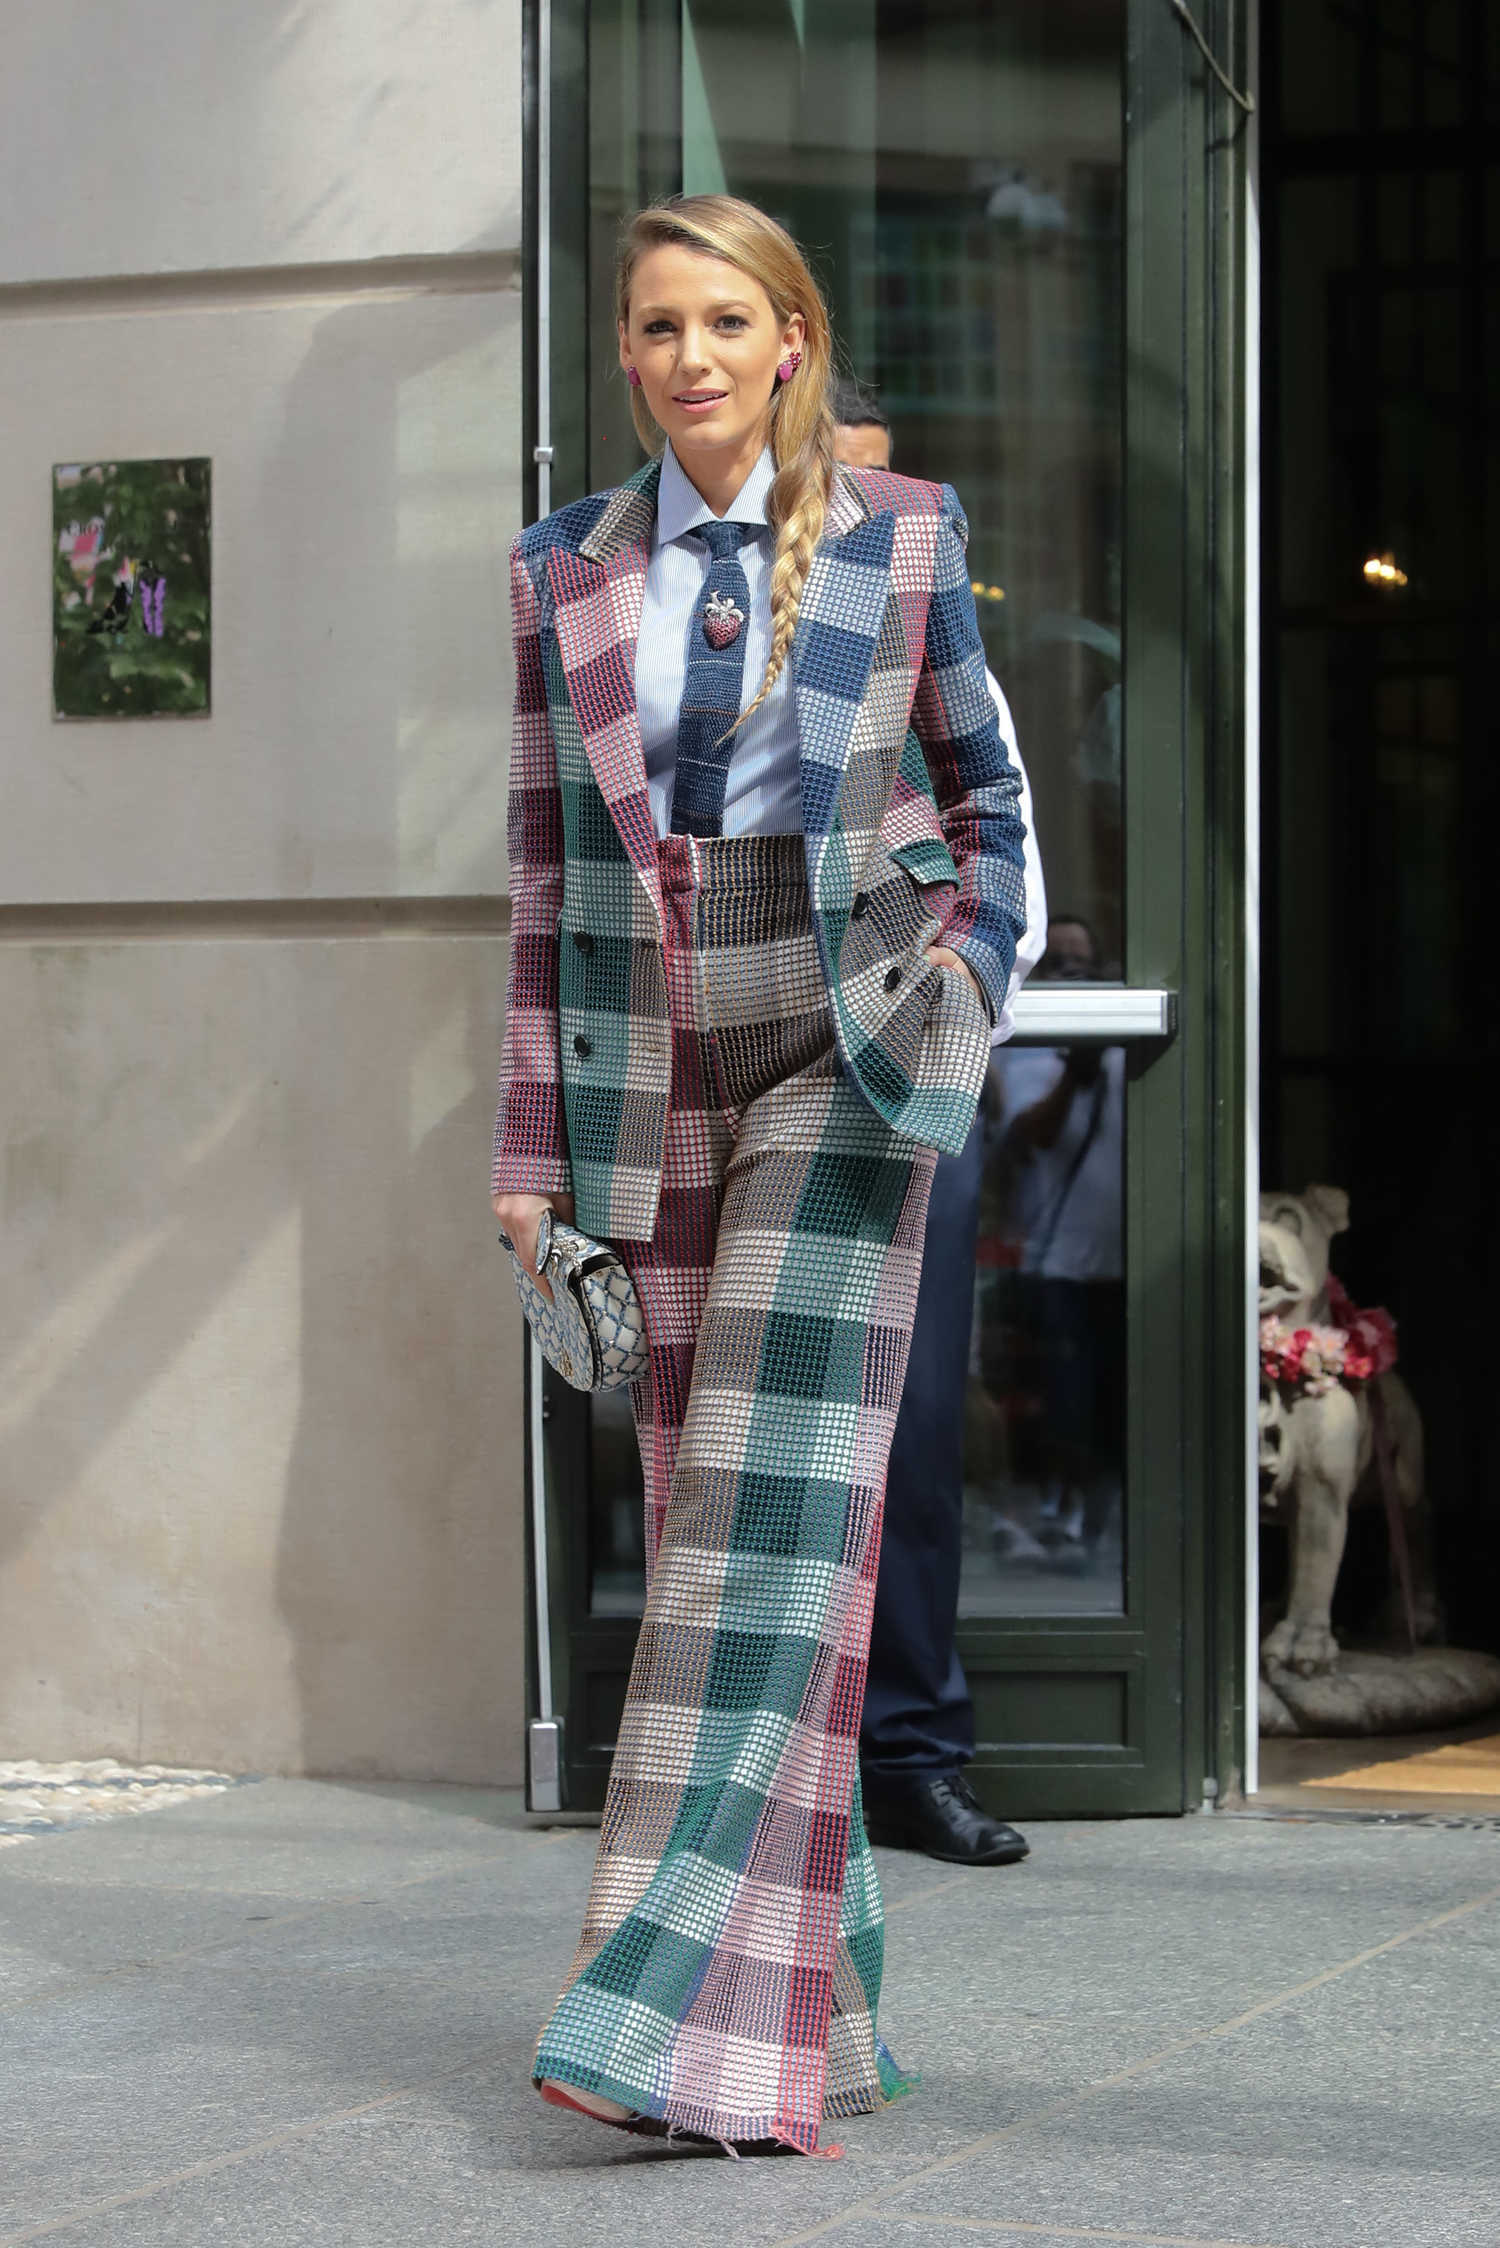 Blake Lively in a Plaid Suit Was Seen Out in NYC – Celeb Donut1500 x 2248